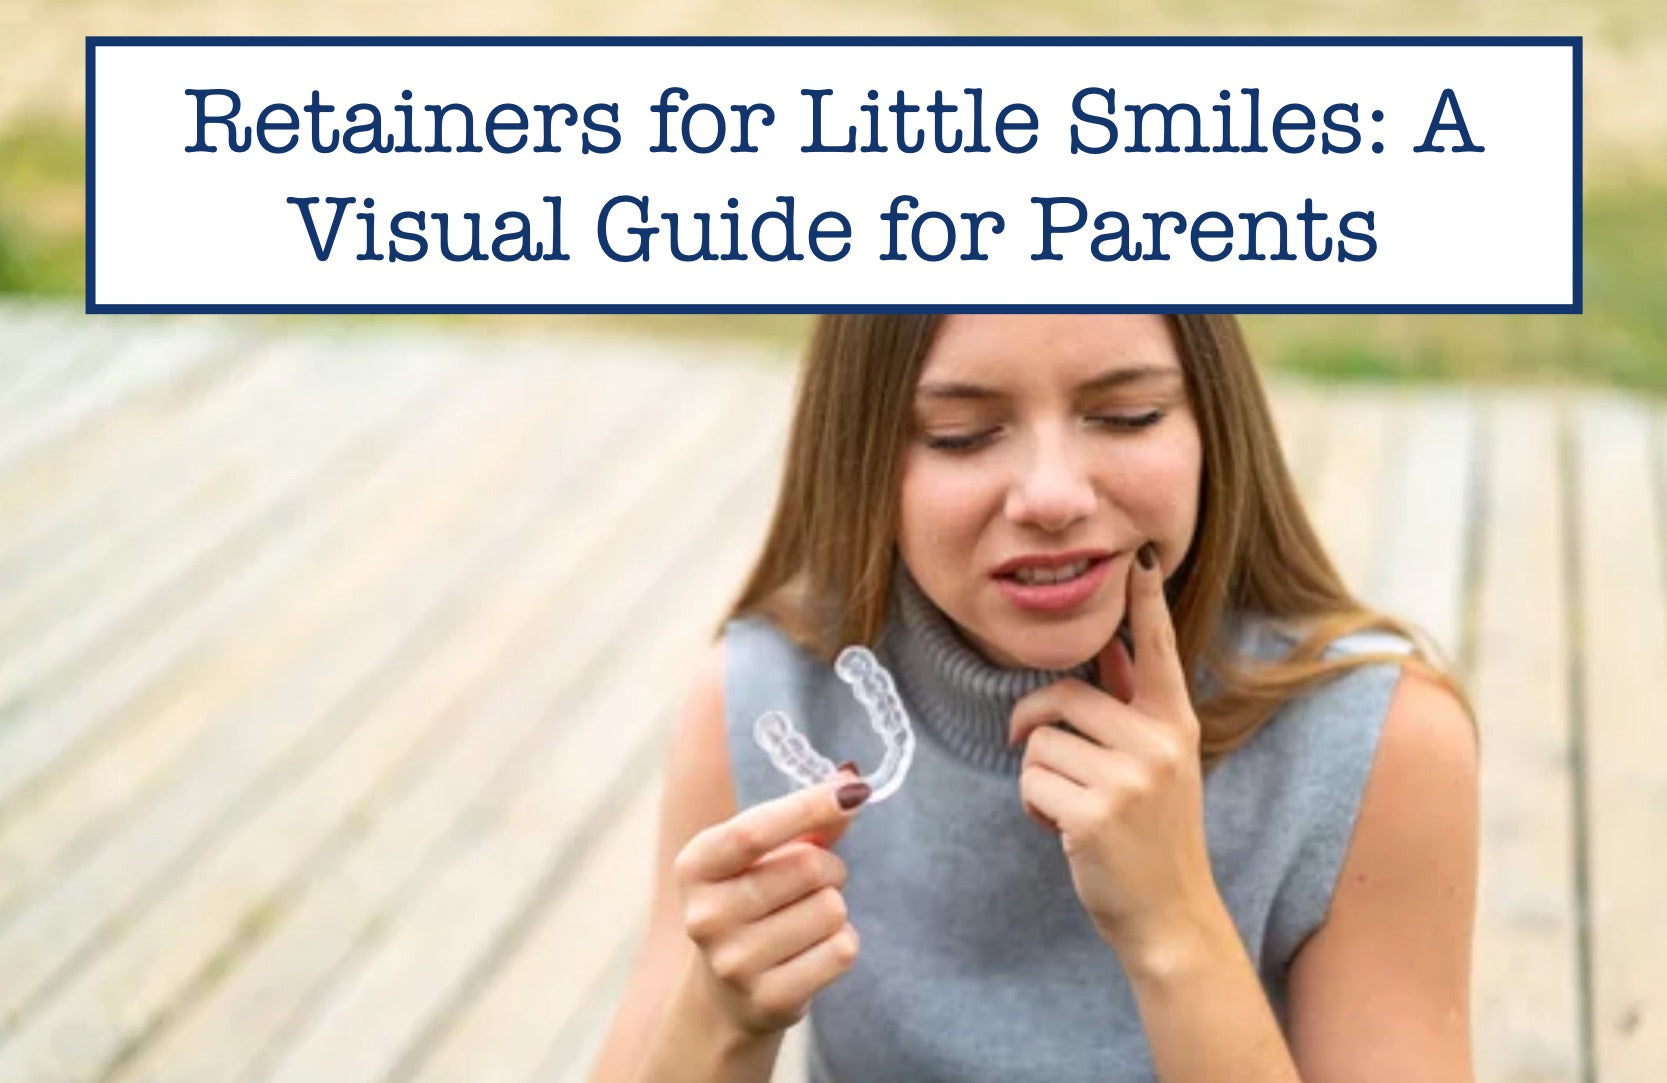 Retainers for Little Smiles: A Visual Guide for Parents